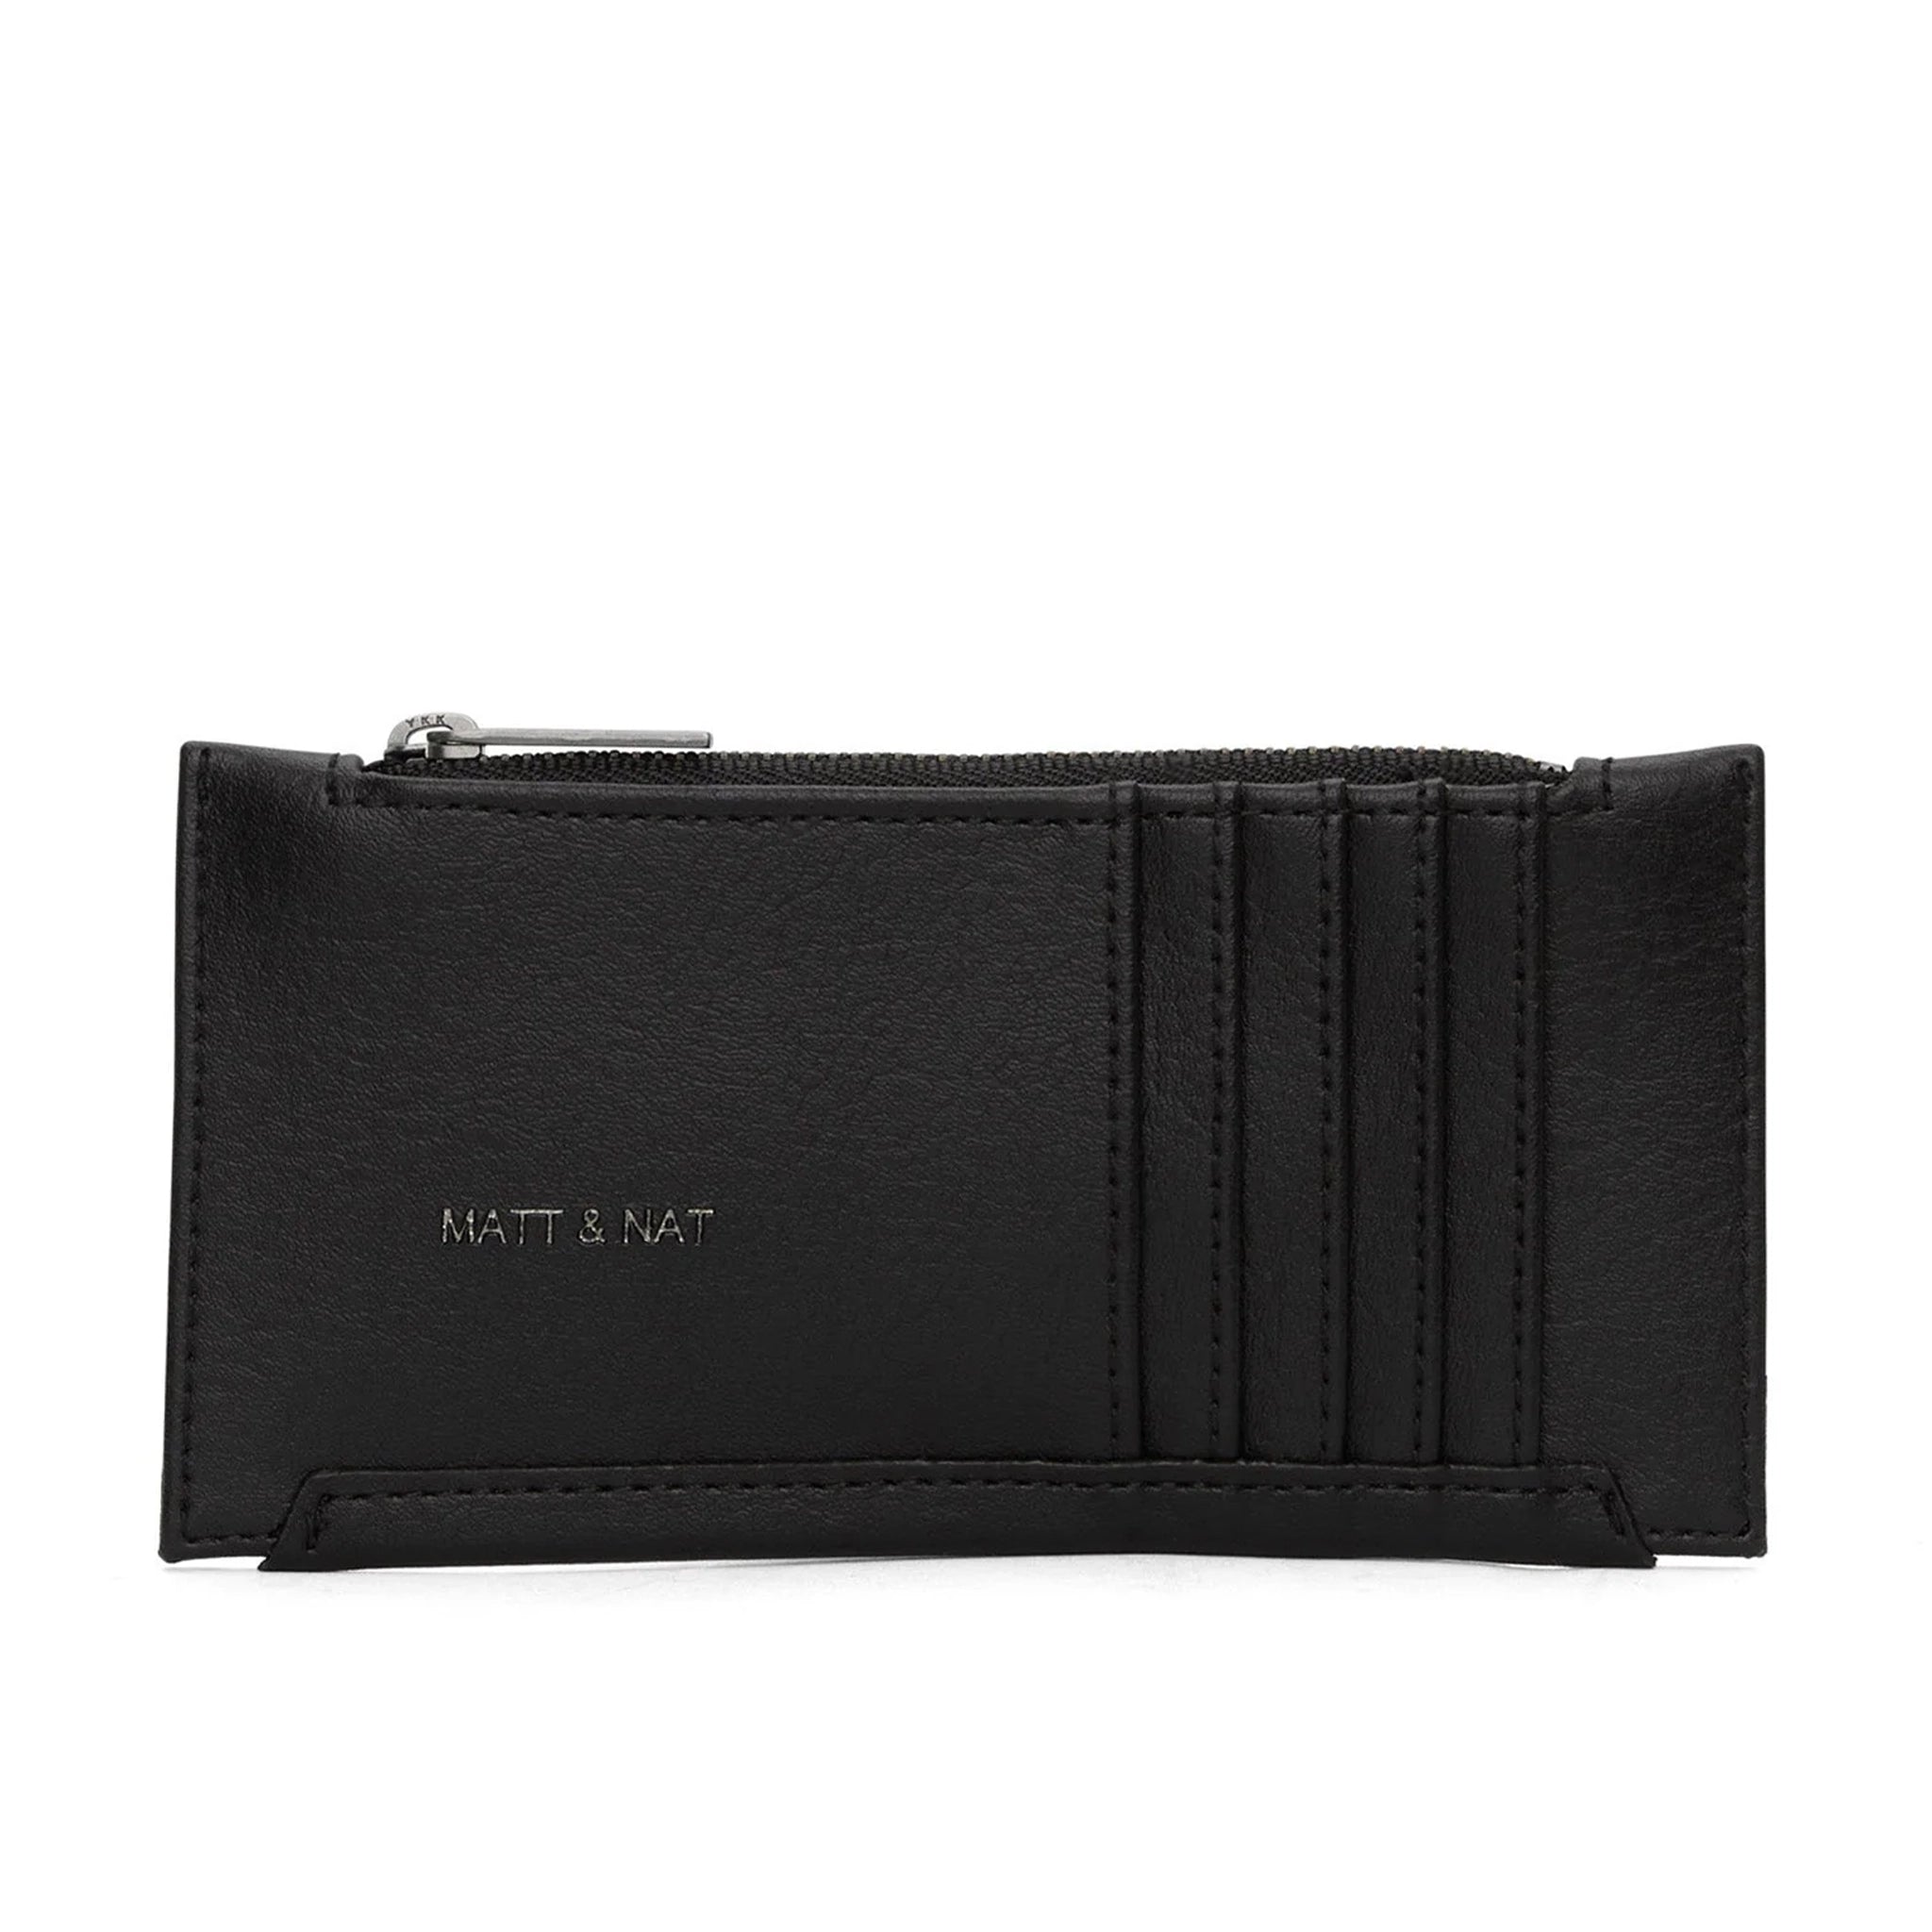 On a white background is a black wallet with a zipper and card slots on the outside.